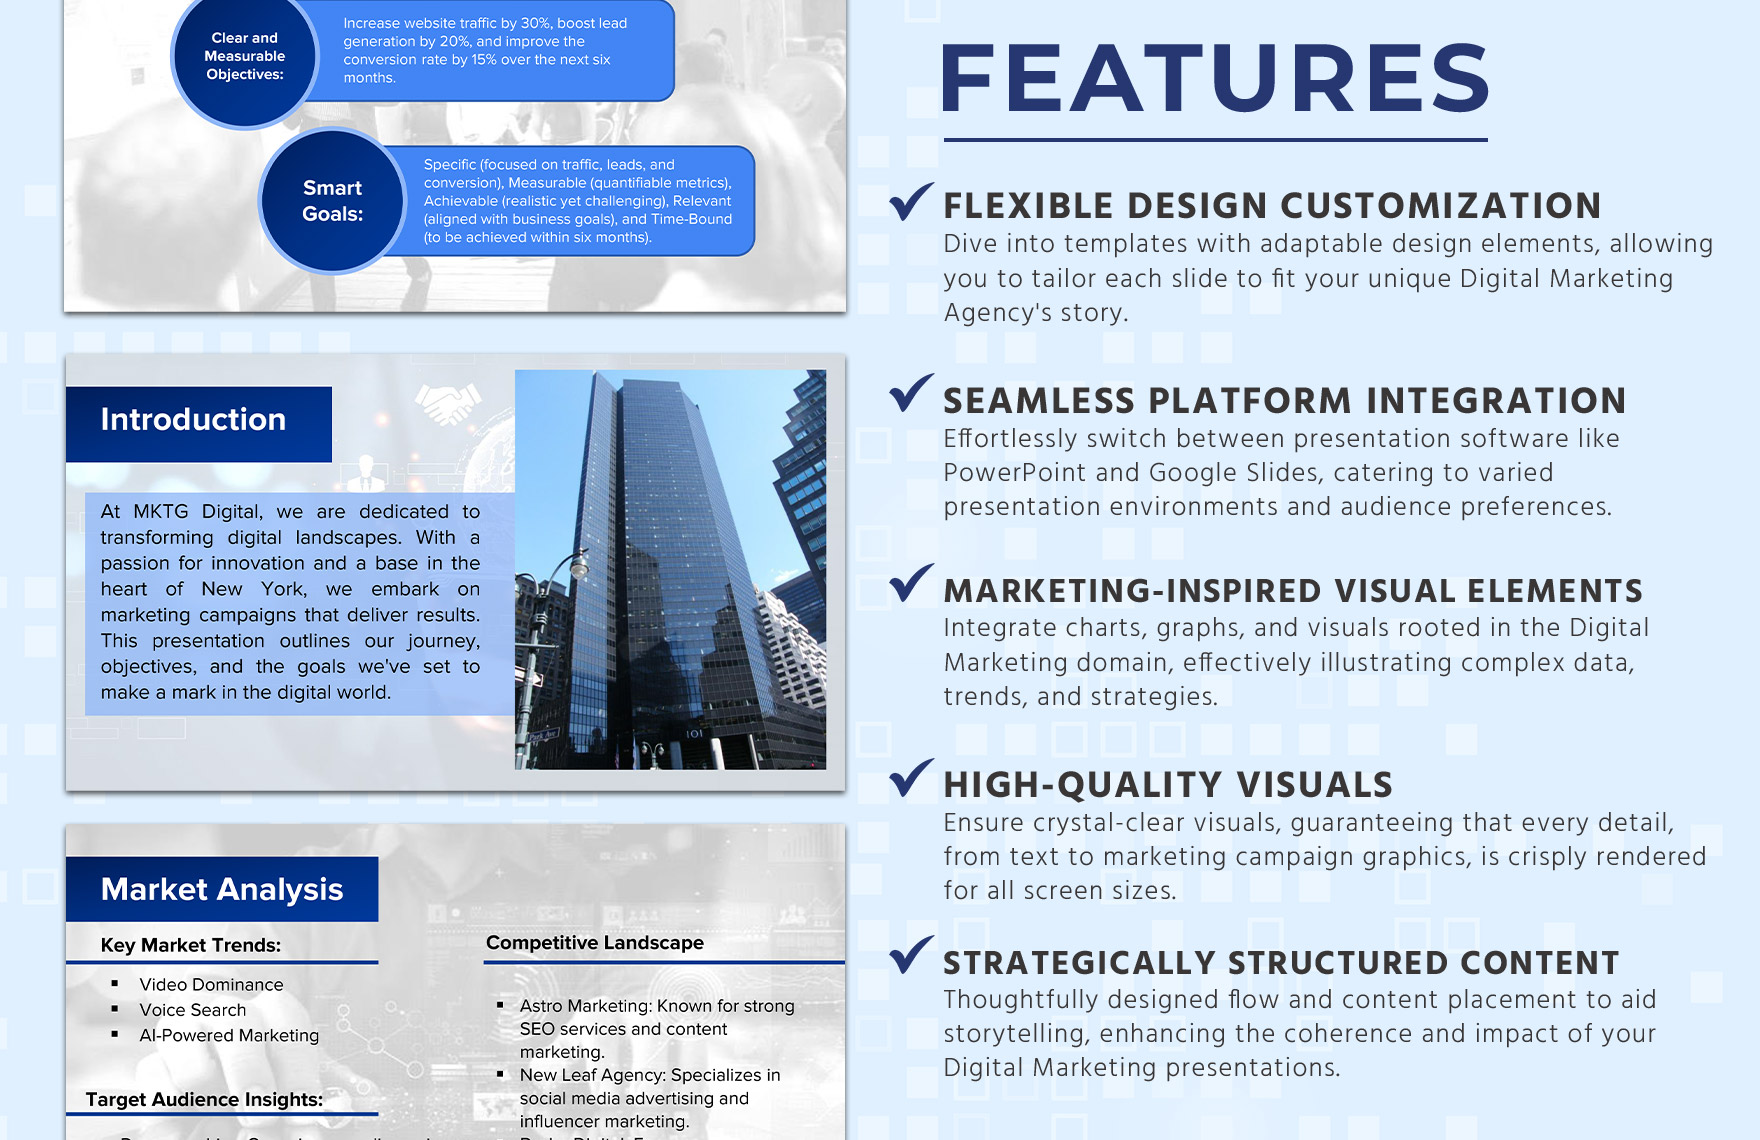 Digital Marketing Agency Marketing Campaign Overview Template